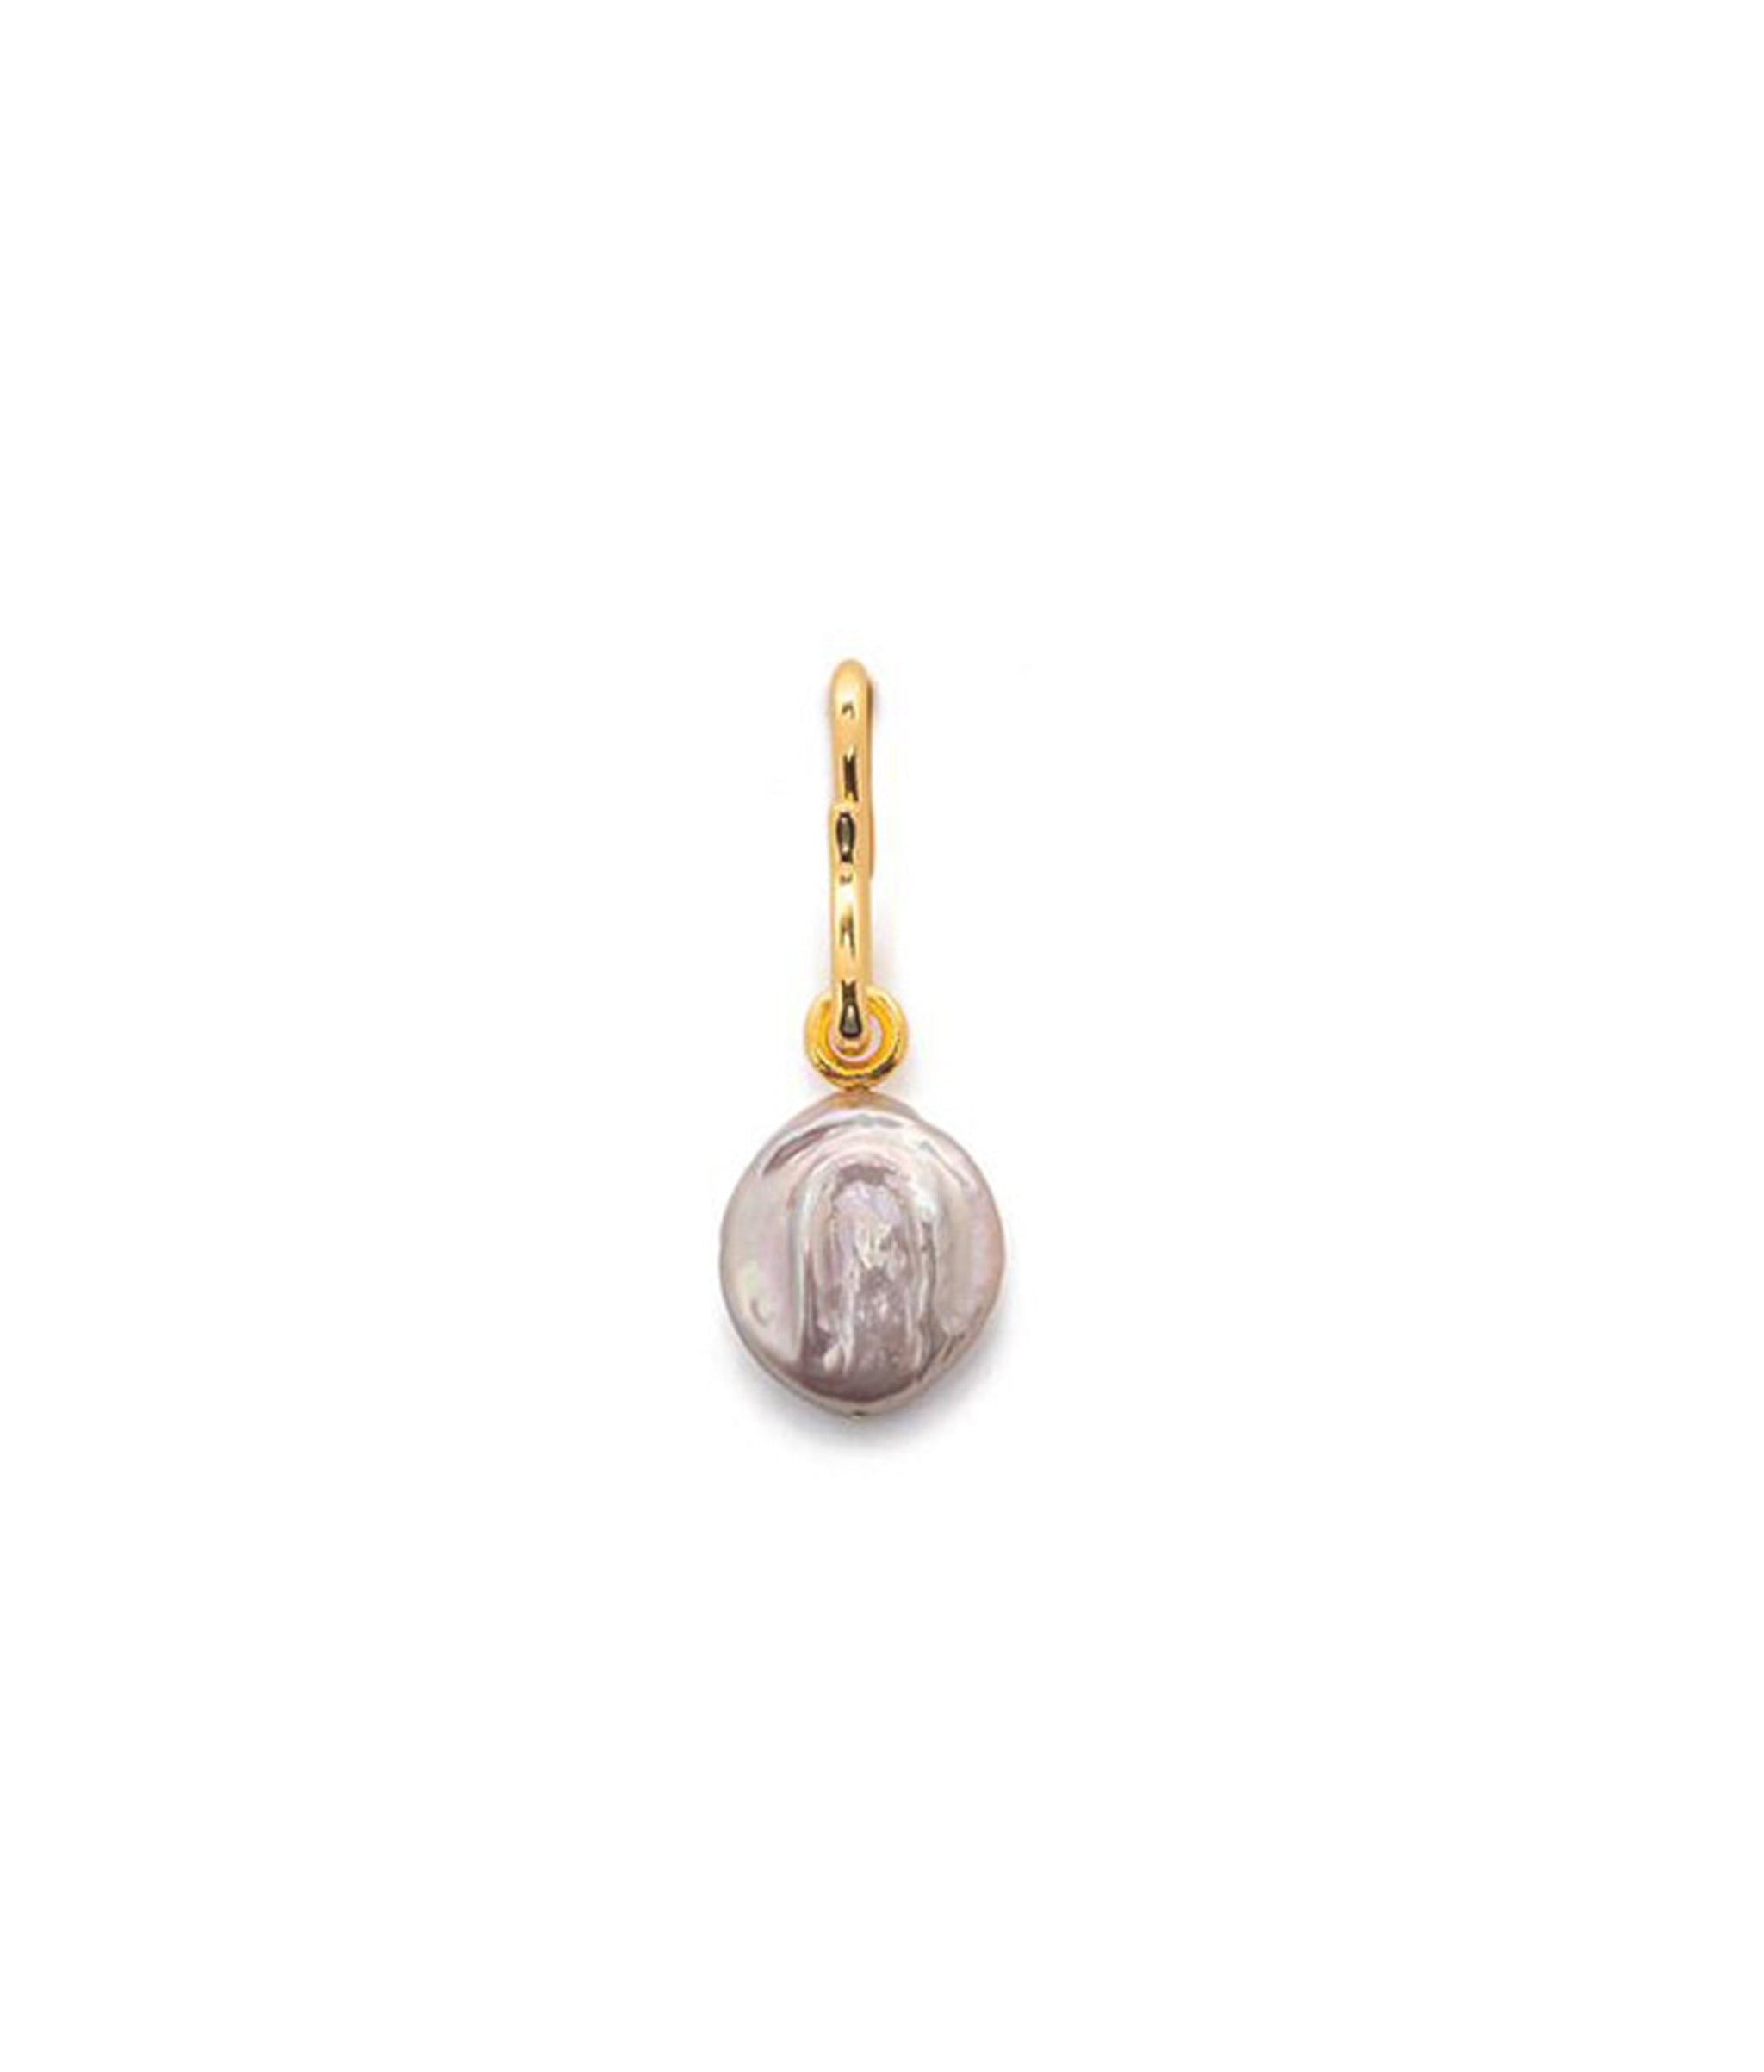 Pink Coin Pearl Charm. Iridescent pink freshwater pearl necklace charm with gold-plated brass S-hook.